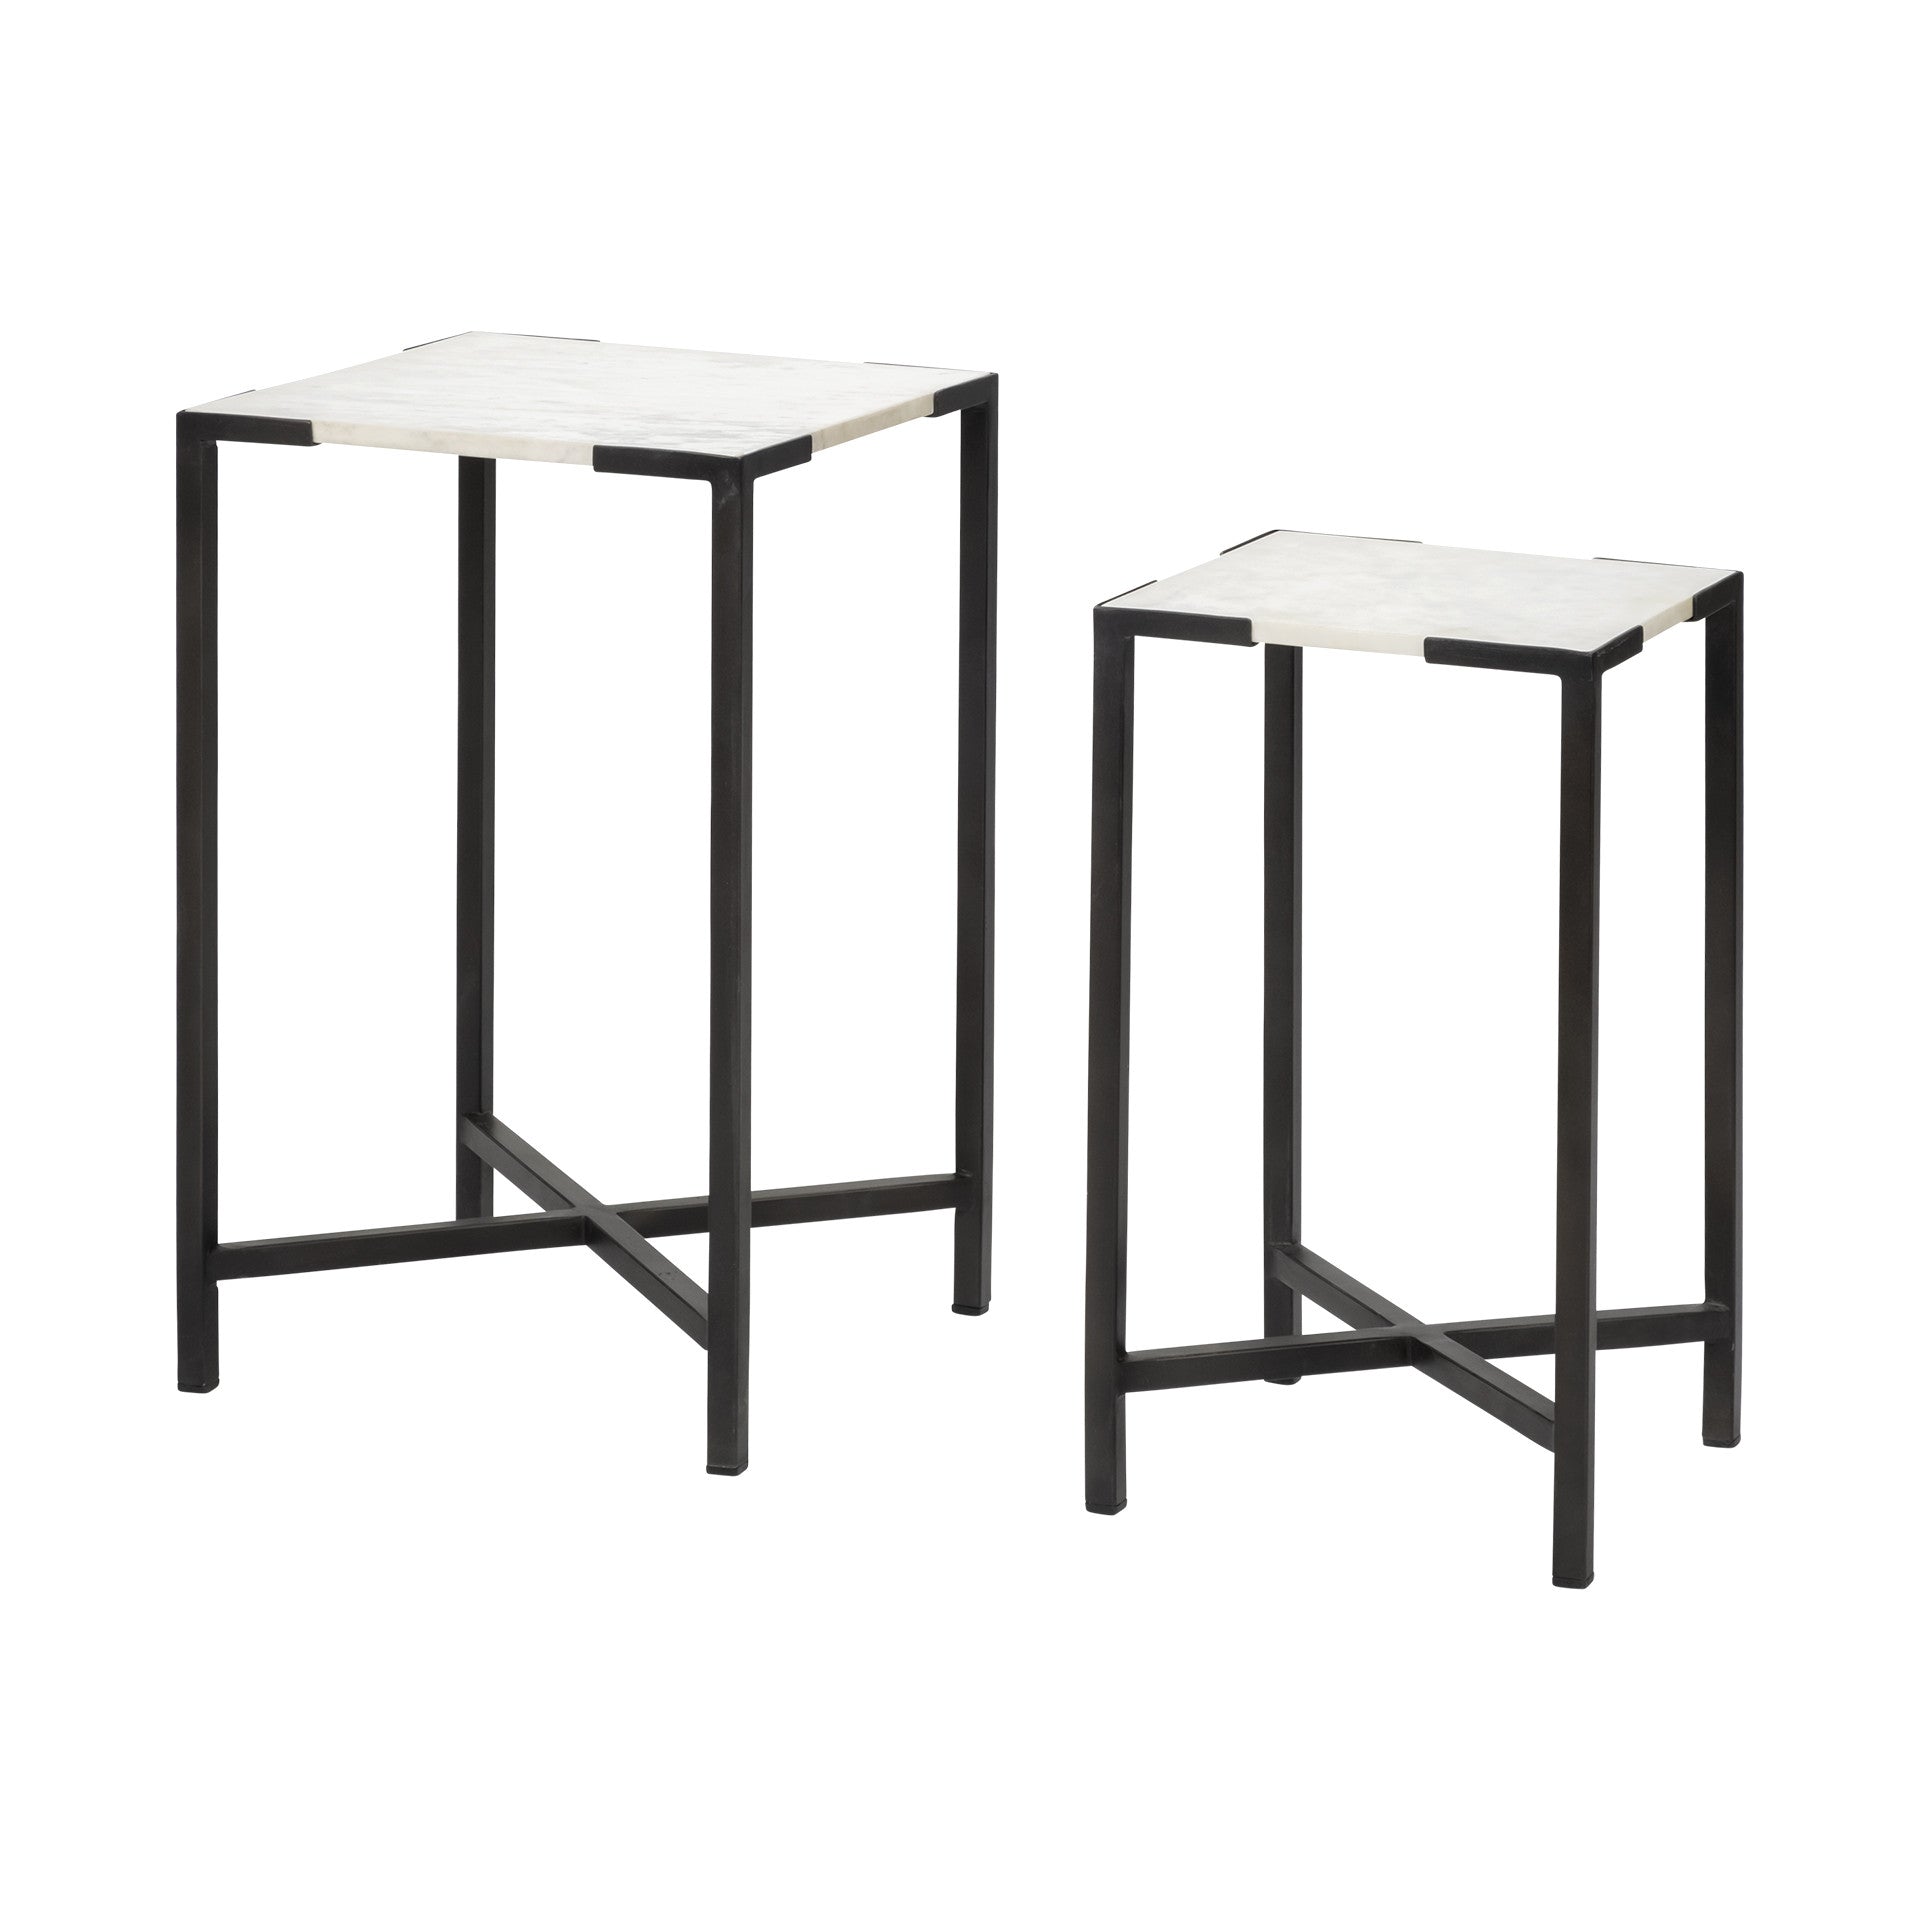 Set Of 2 White Marble Square Top Accent Tables With Black Iron Frame